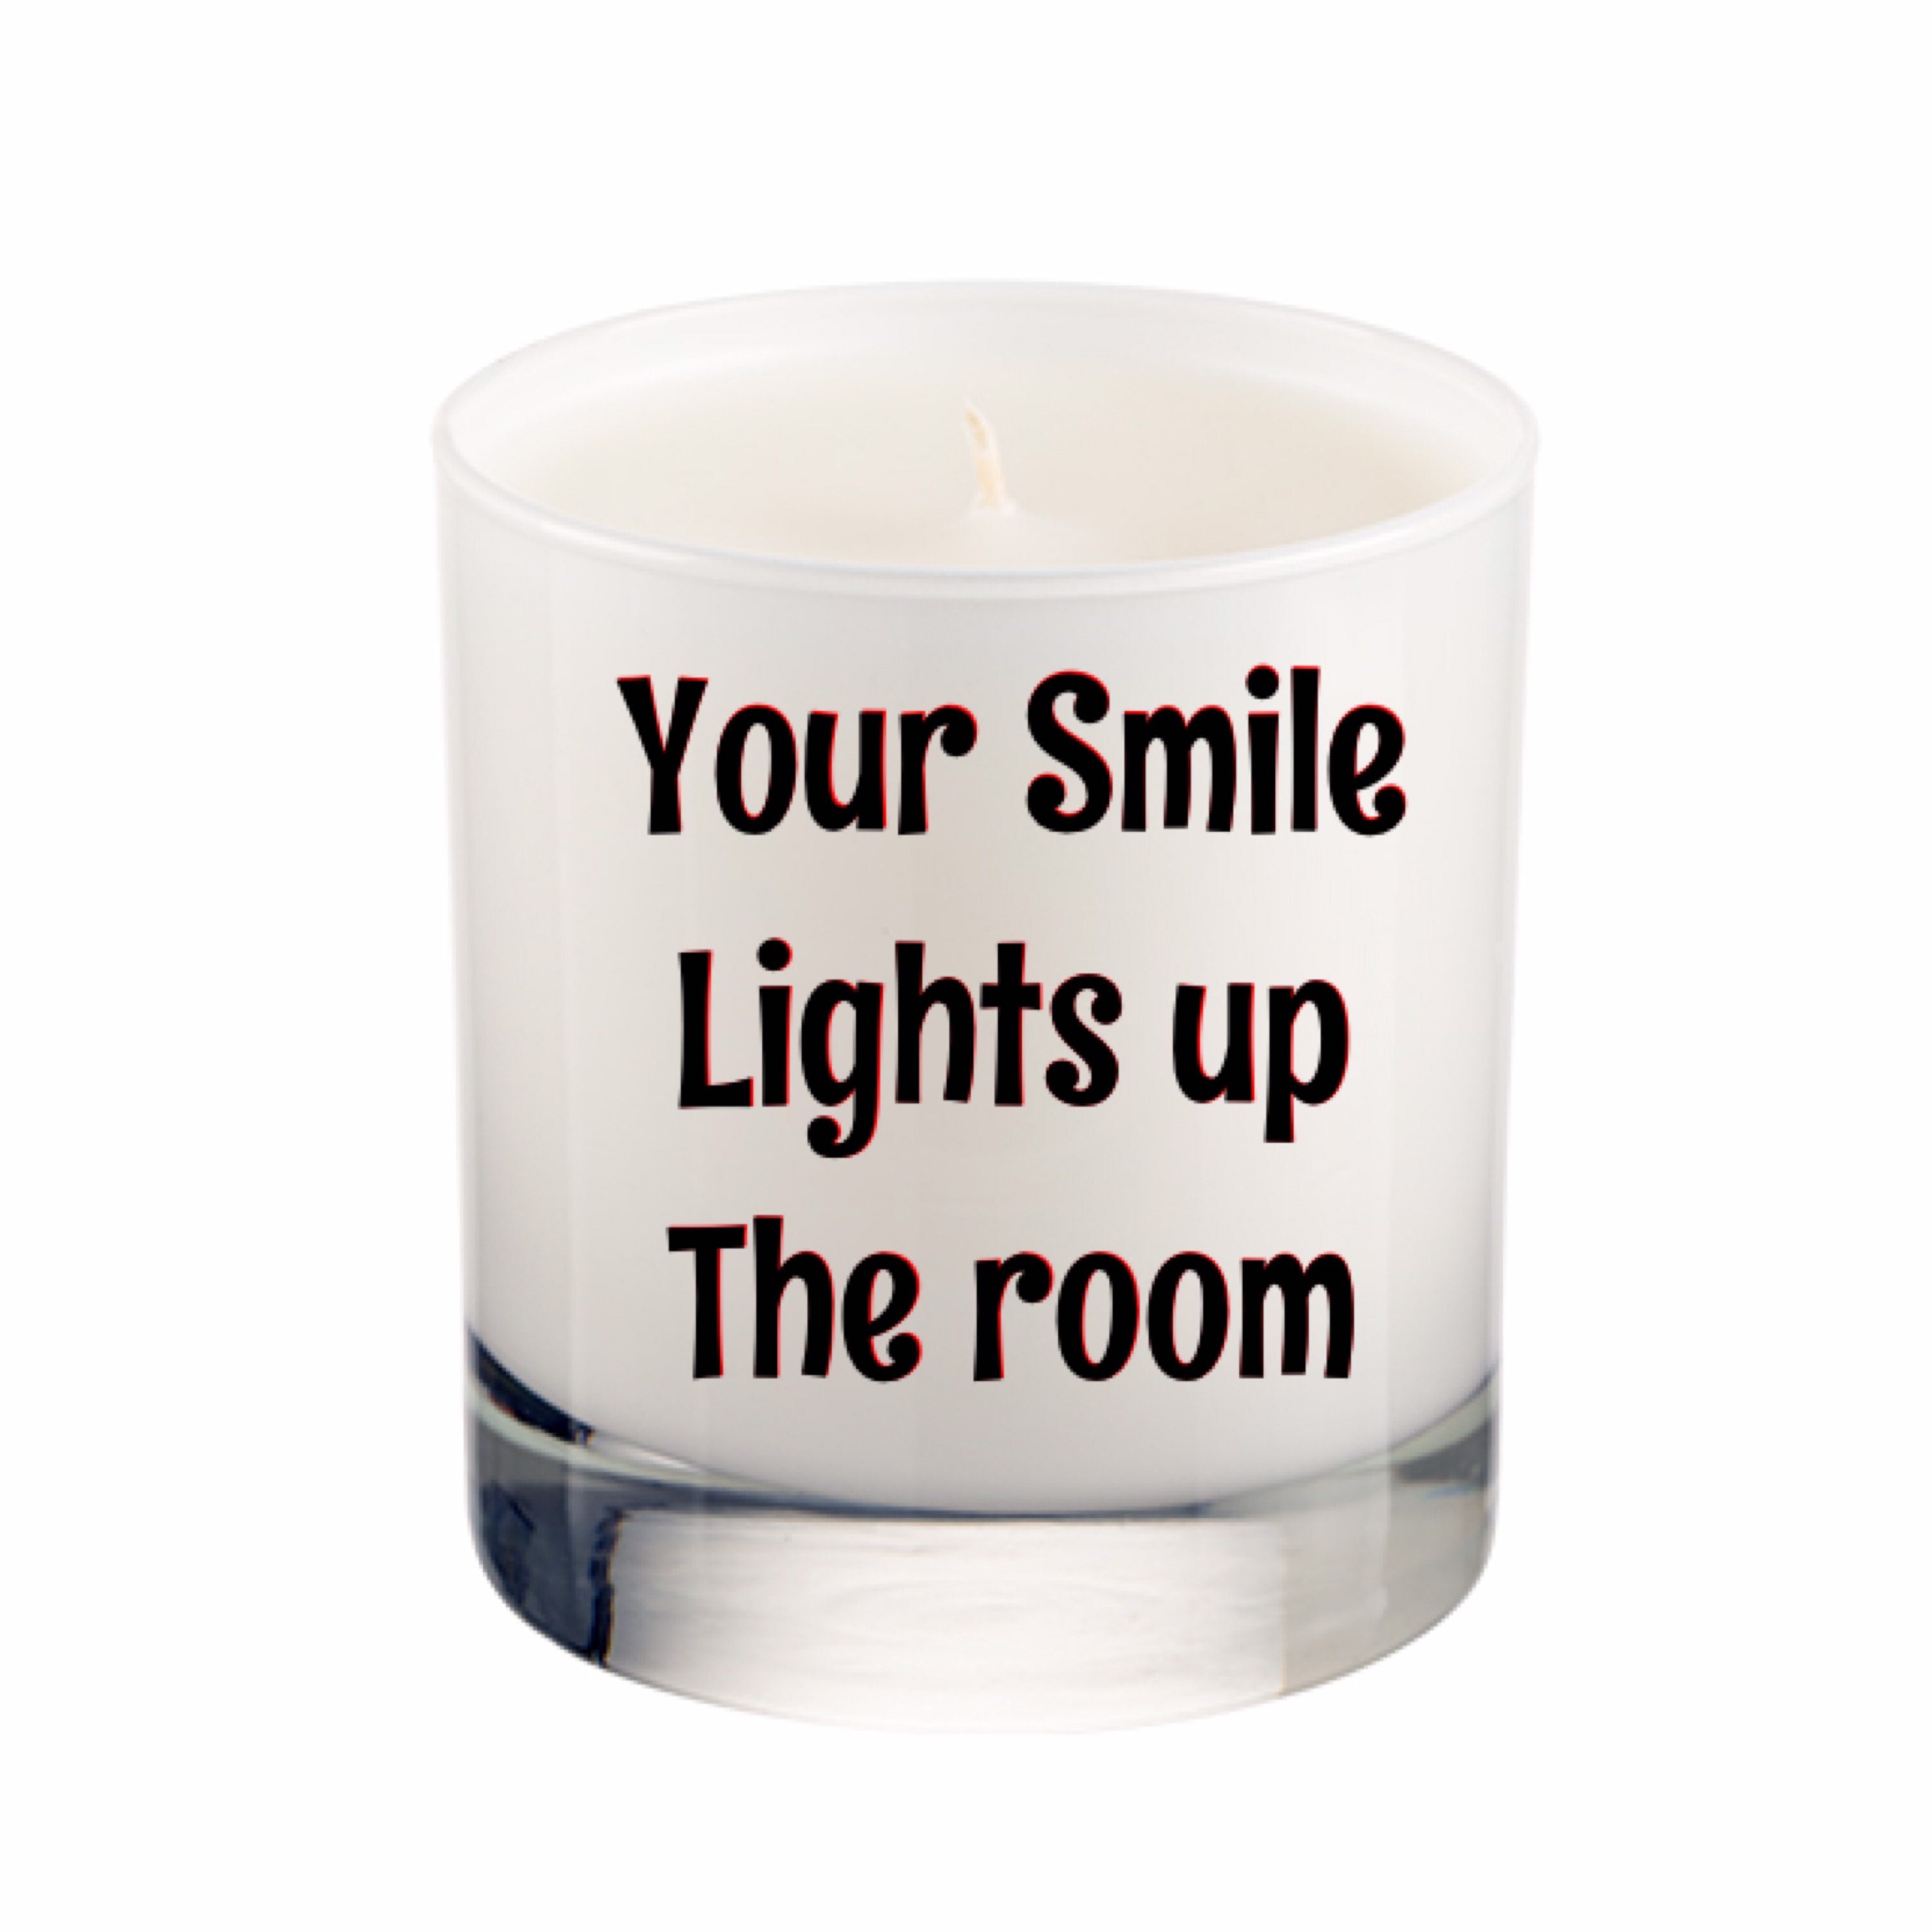 Your Smile Lights up the Room Inspiration Candles Cheer up pic